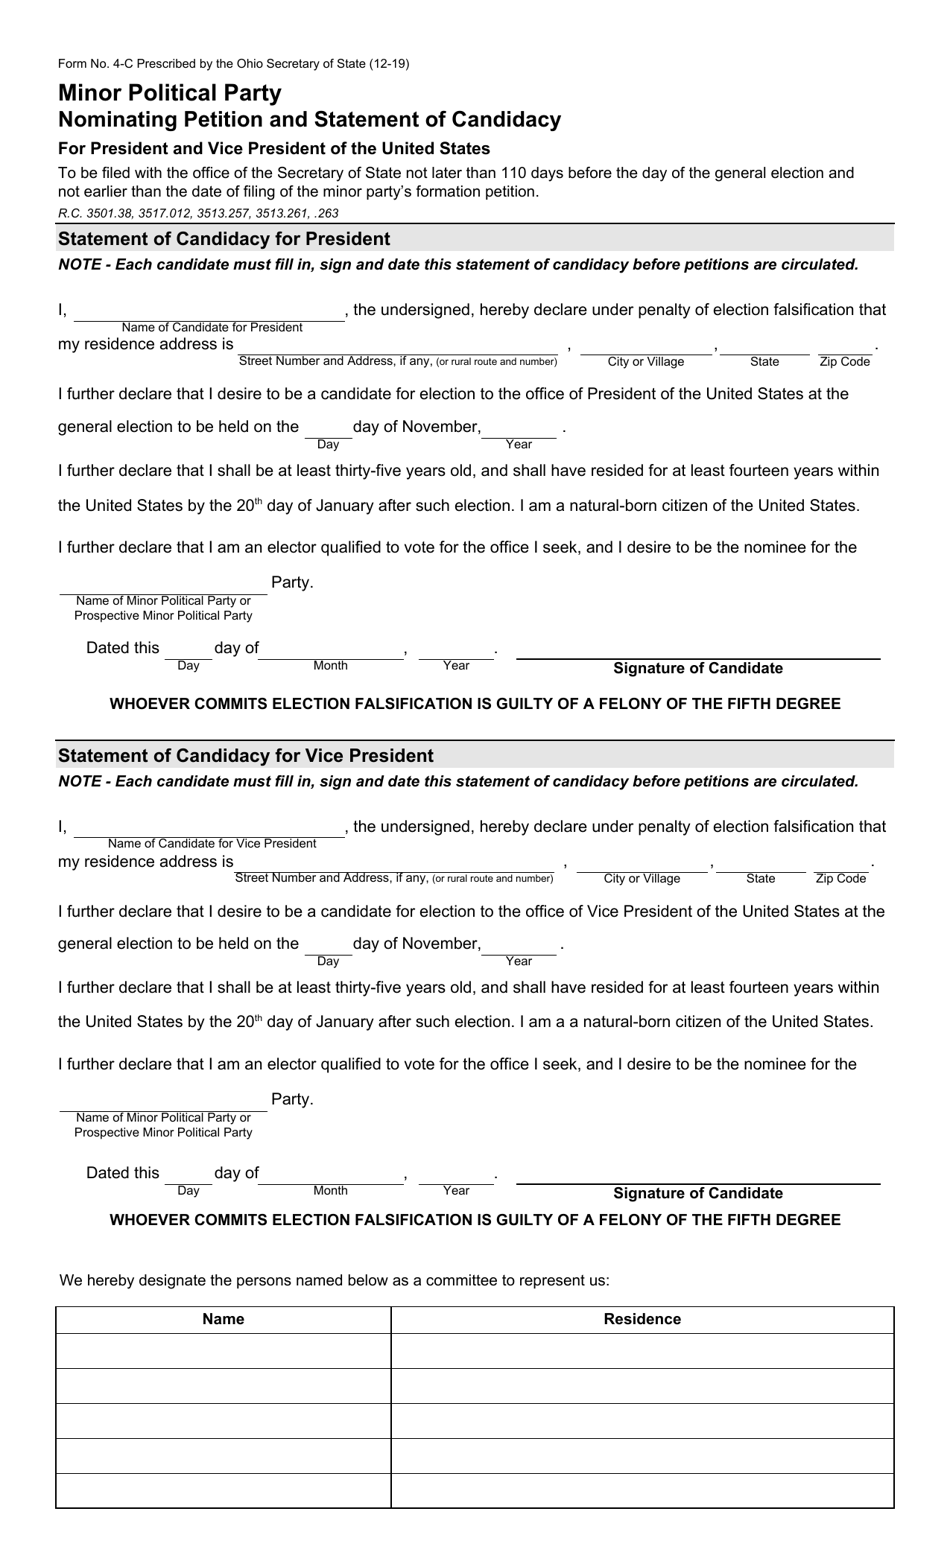 Form 4-C Minor Political Party Nominating Petition and Statement of Candidacy for President and Vice President of the United States - Ohio, Page 1